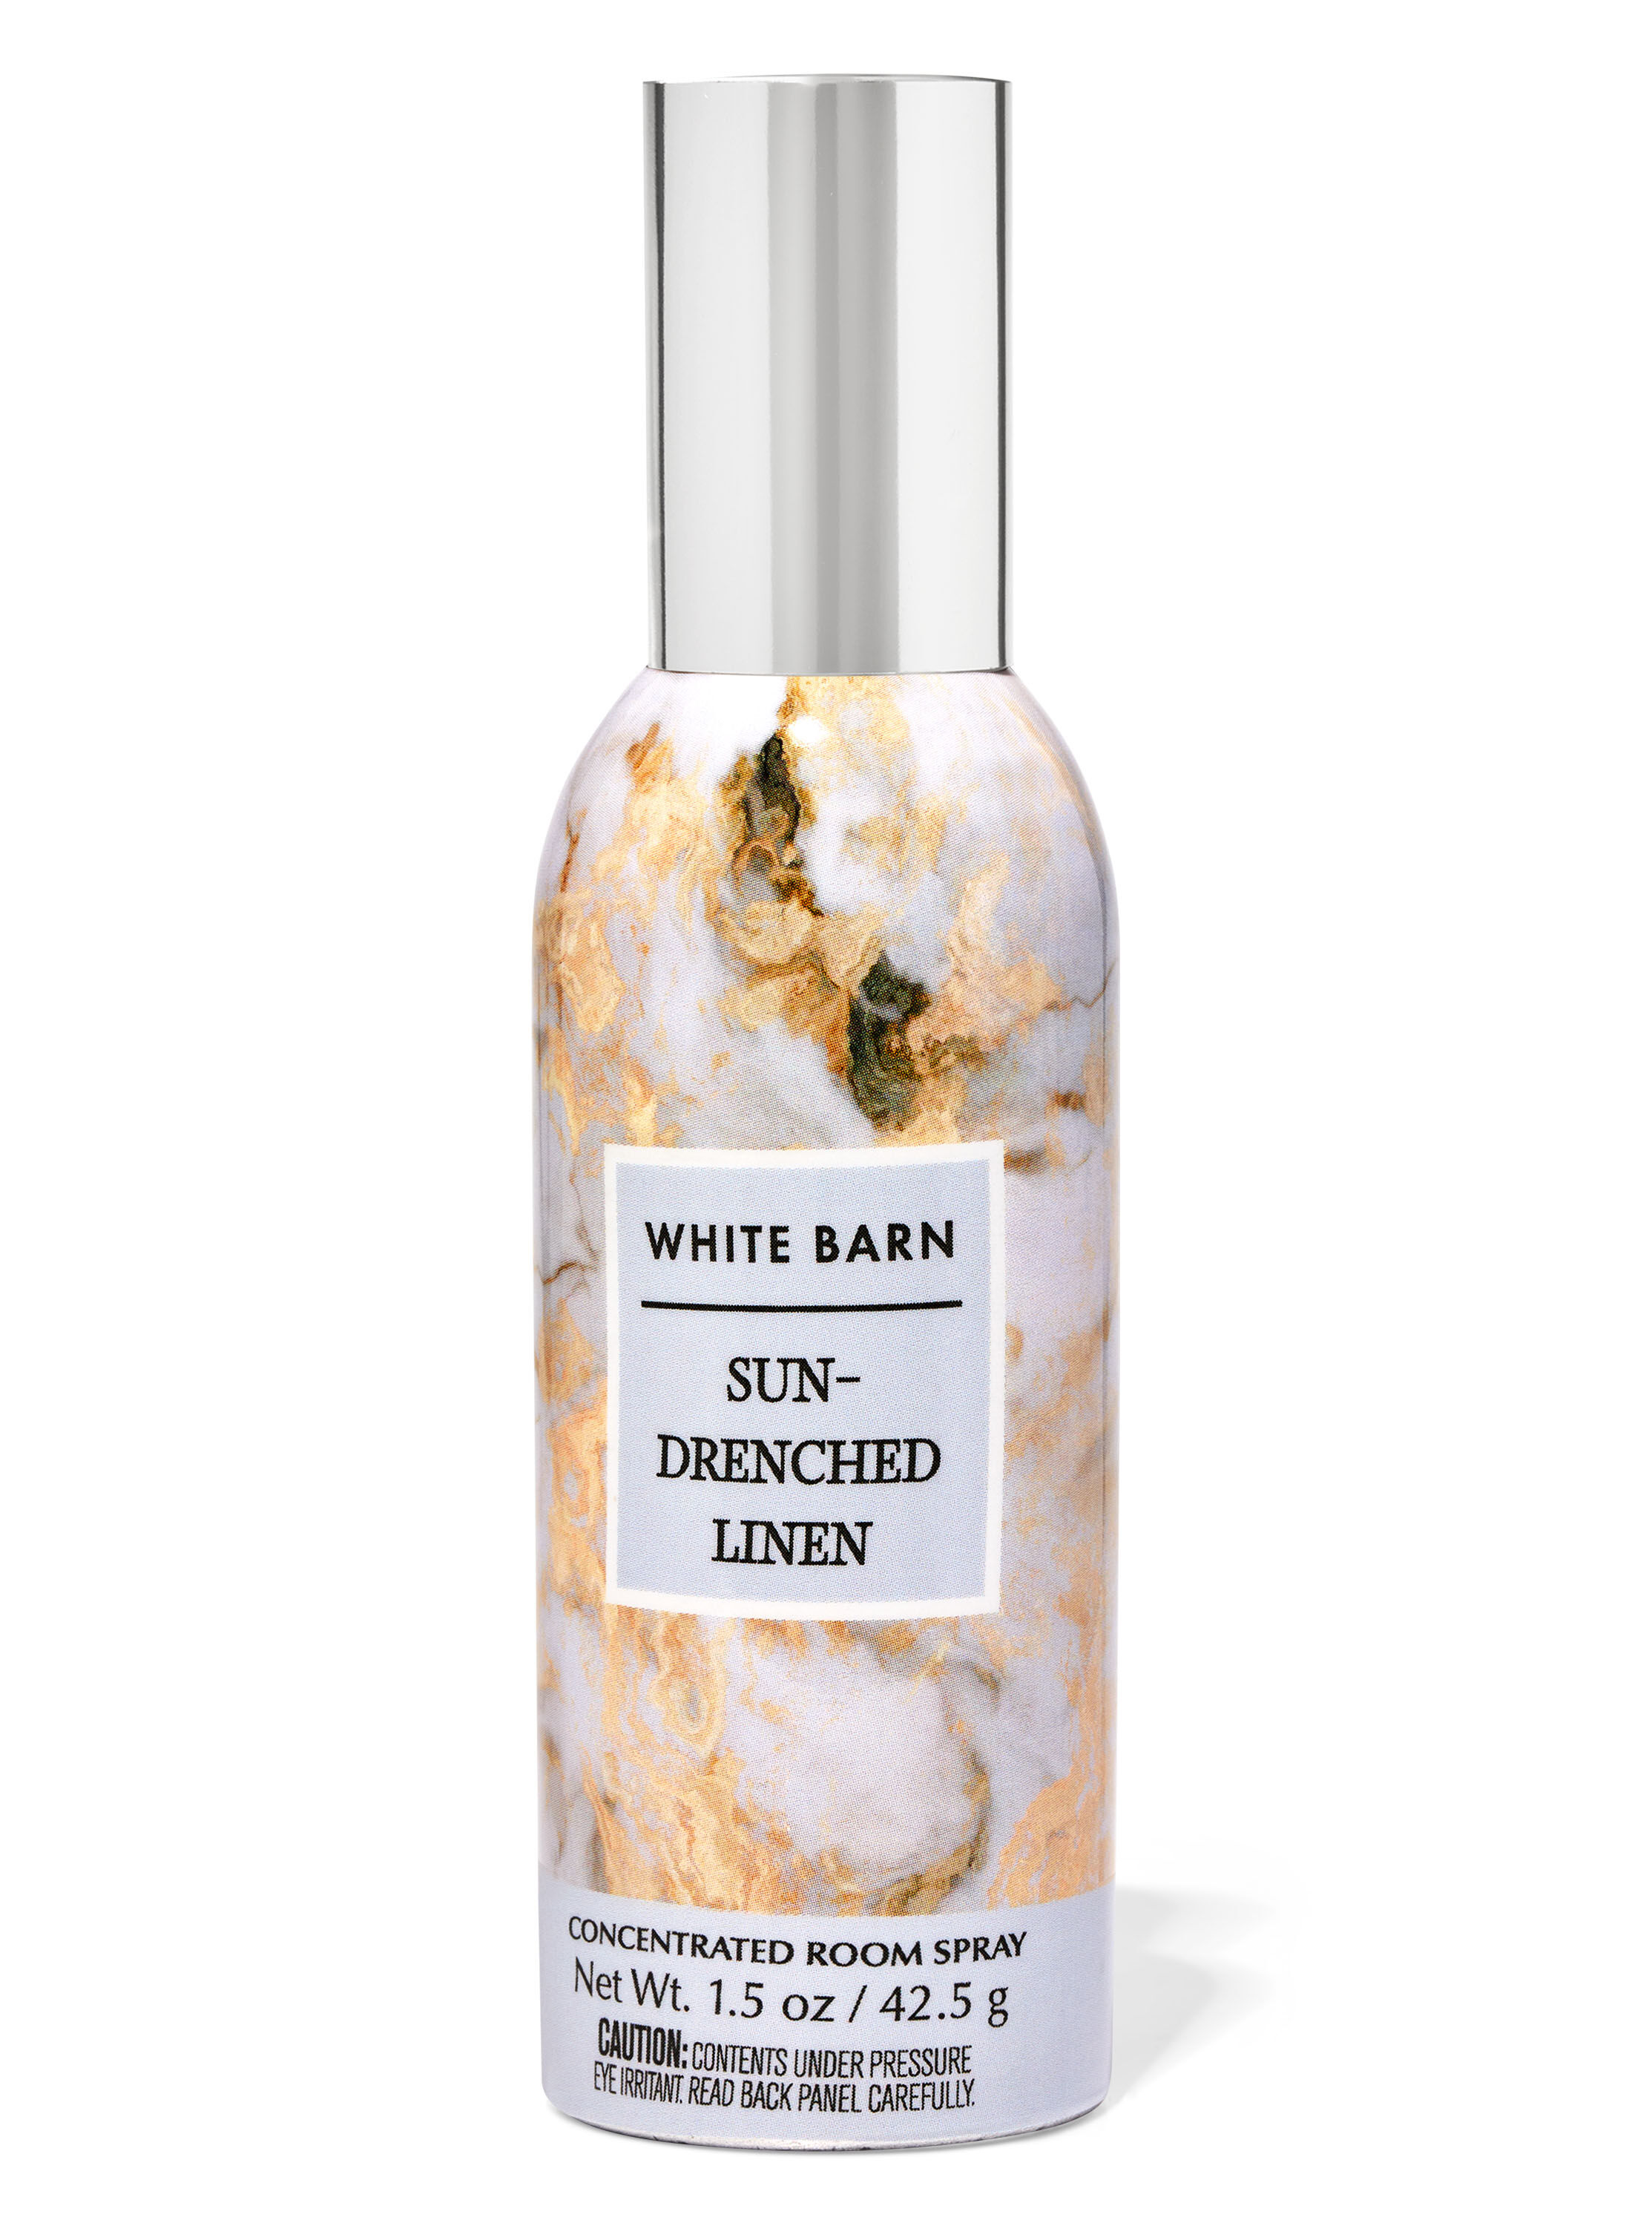 Sun-Drenched Linen Concentrated Room Spray